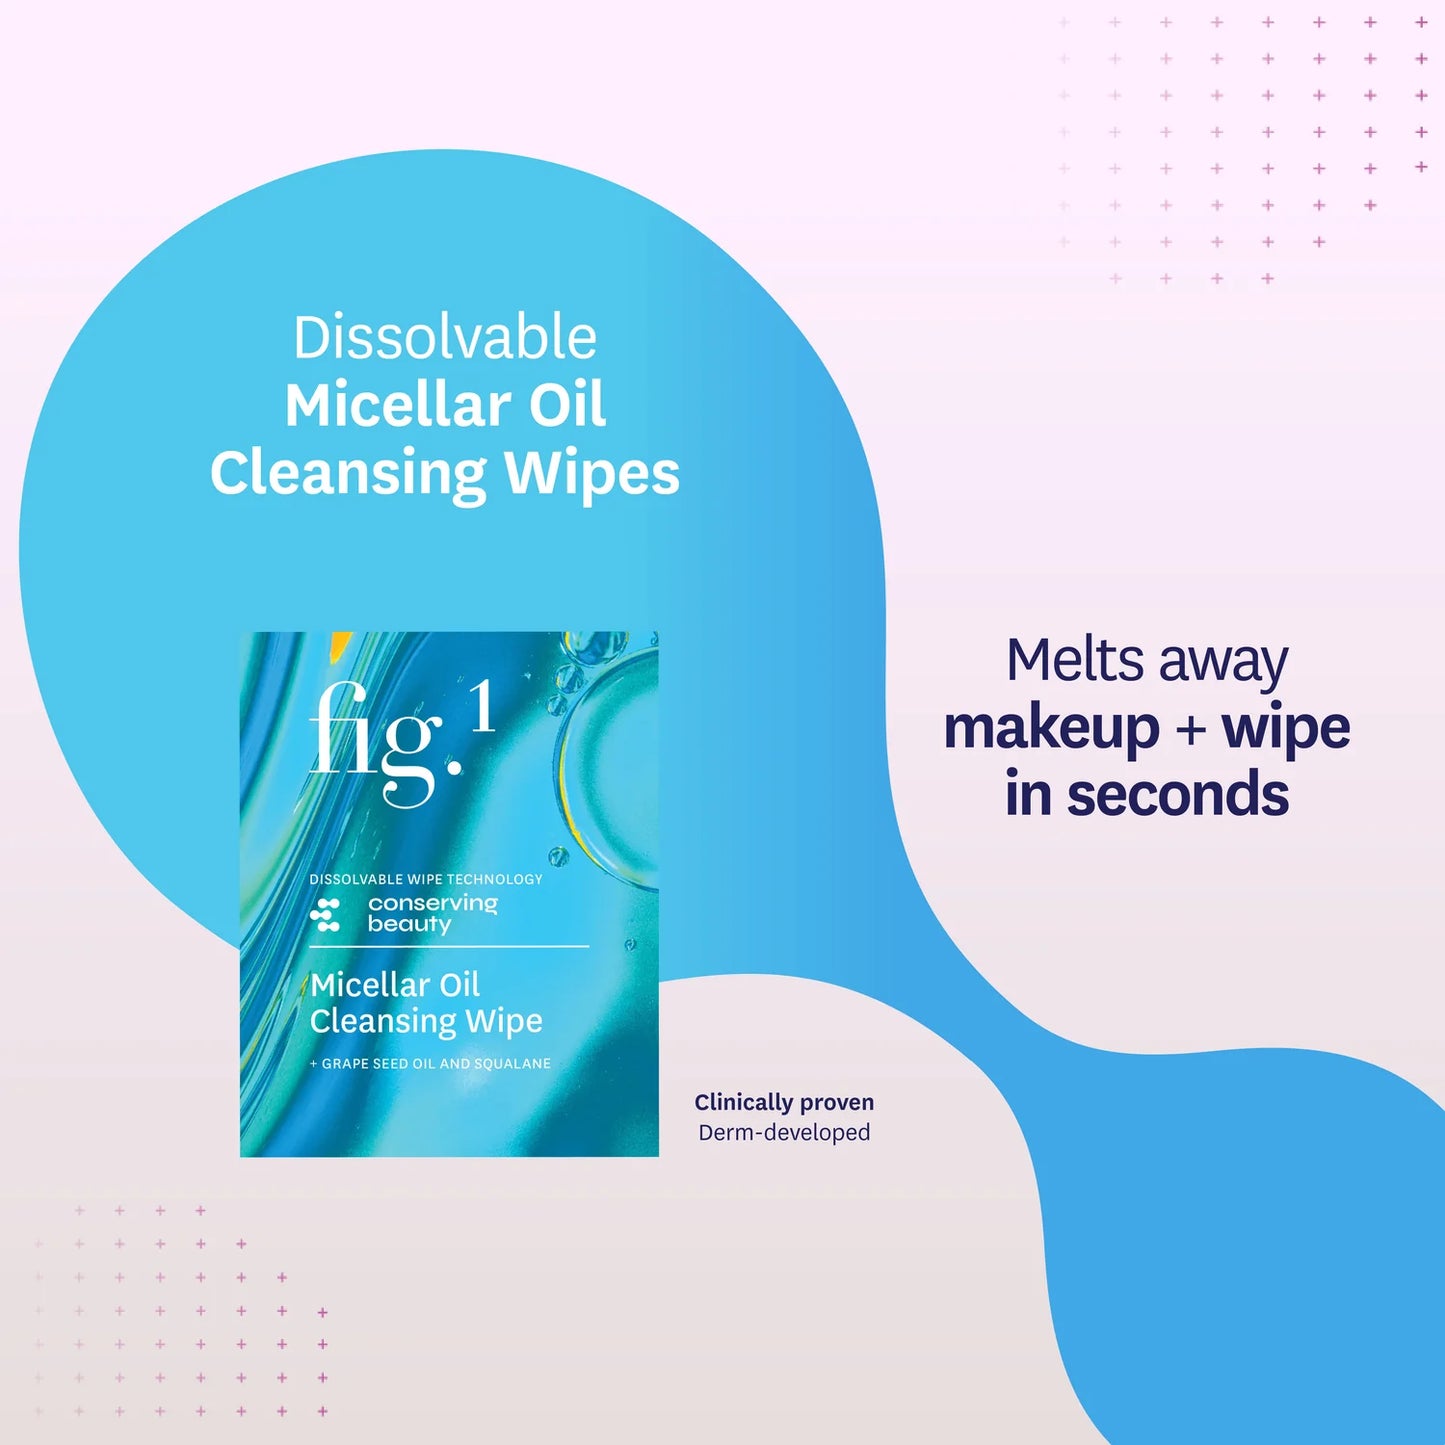 Micellar Oil Cleansing Wipes - 14 Biodegradable Wipes